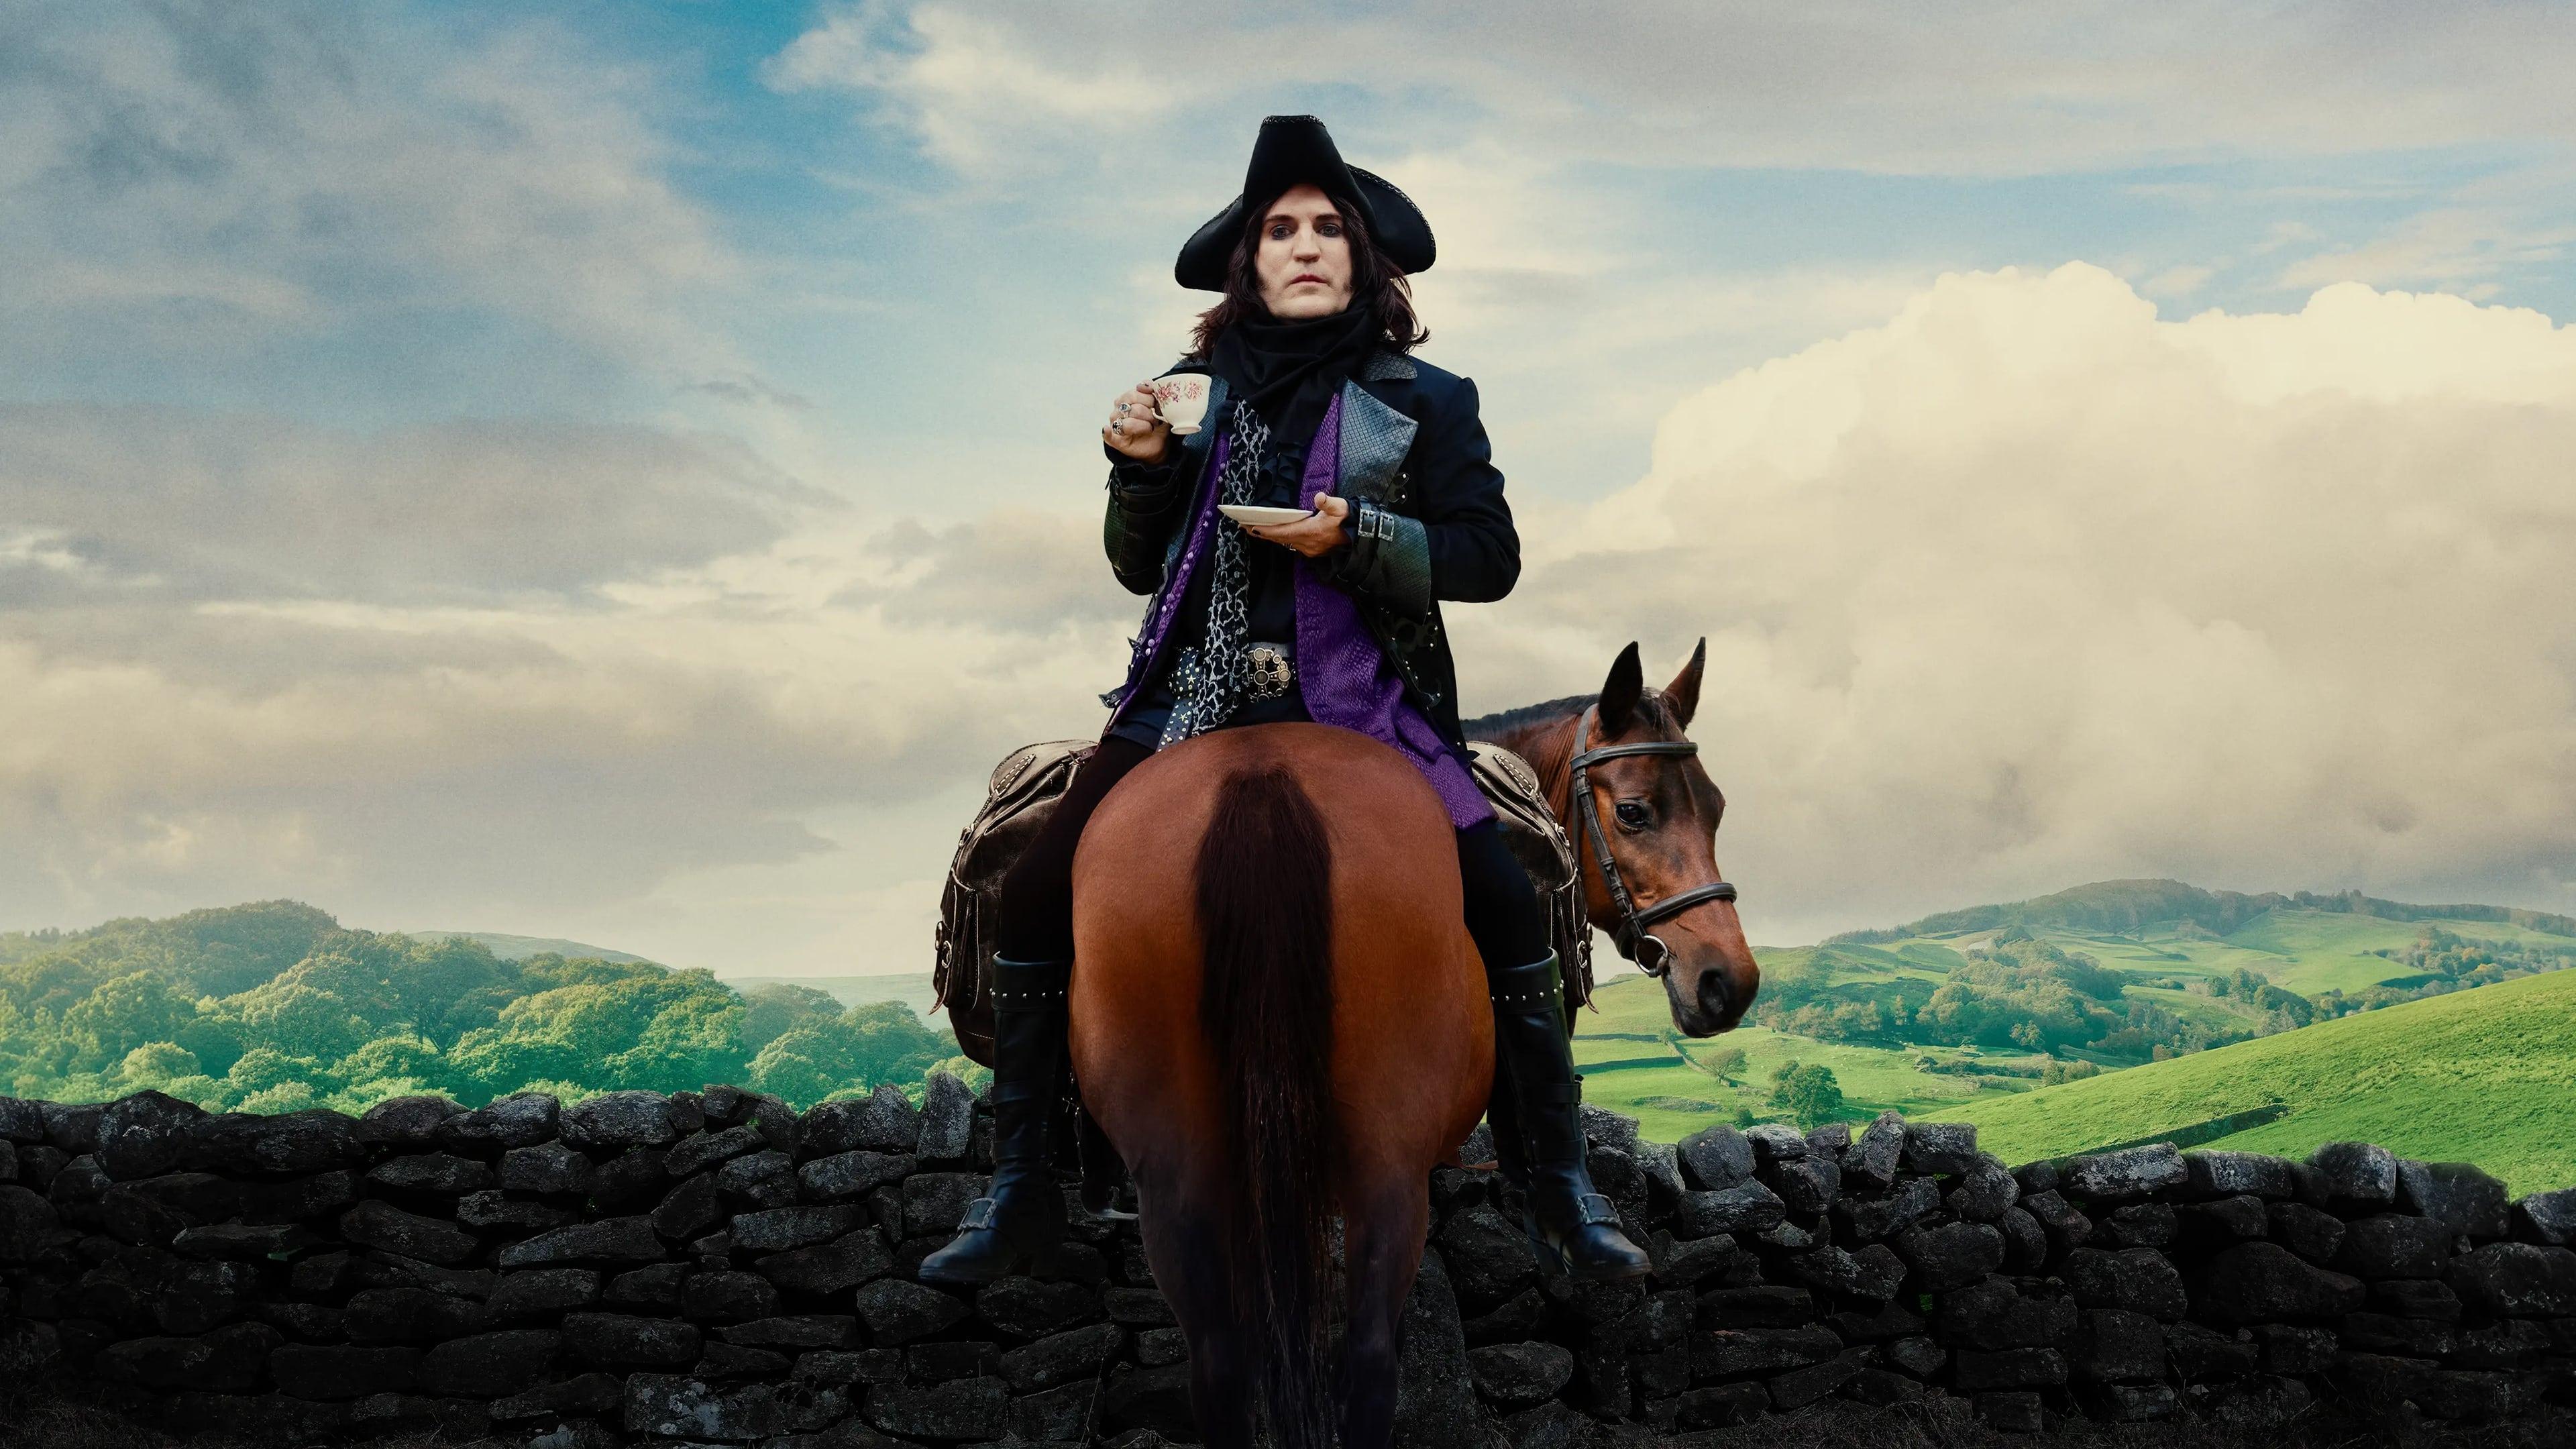 The Completely Made-Up Adventures of Dick Turpin backdrop